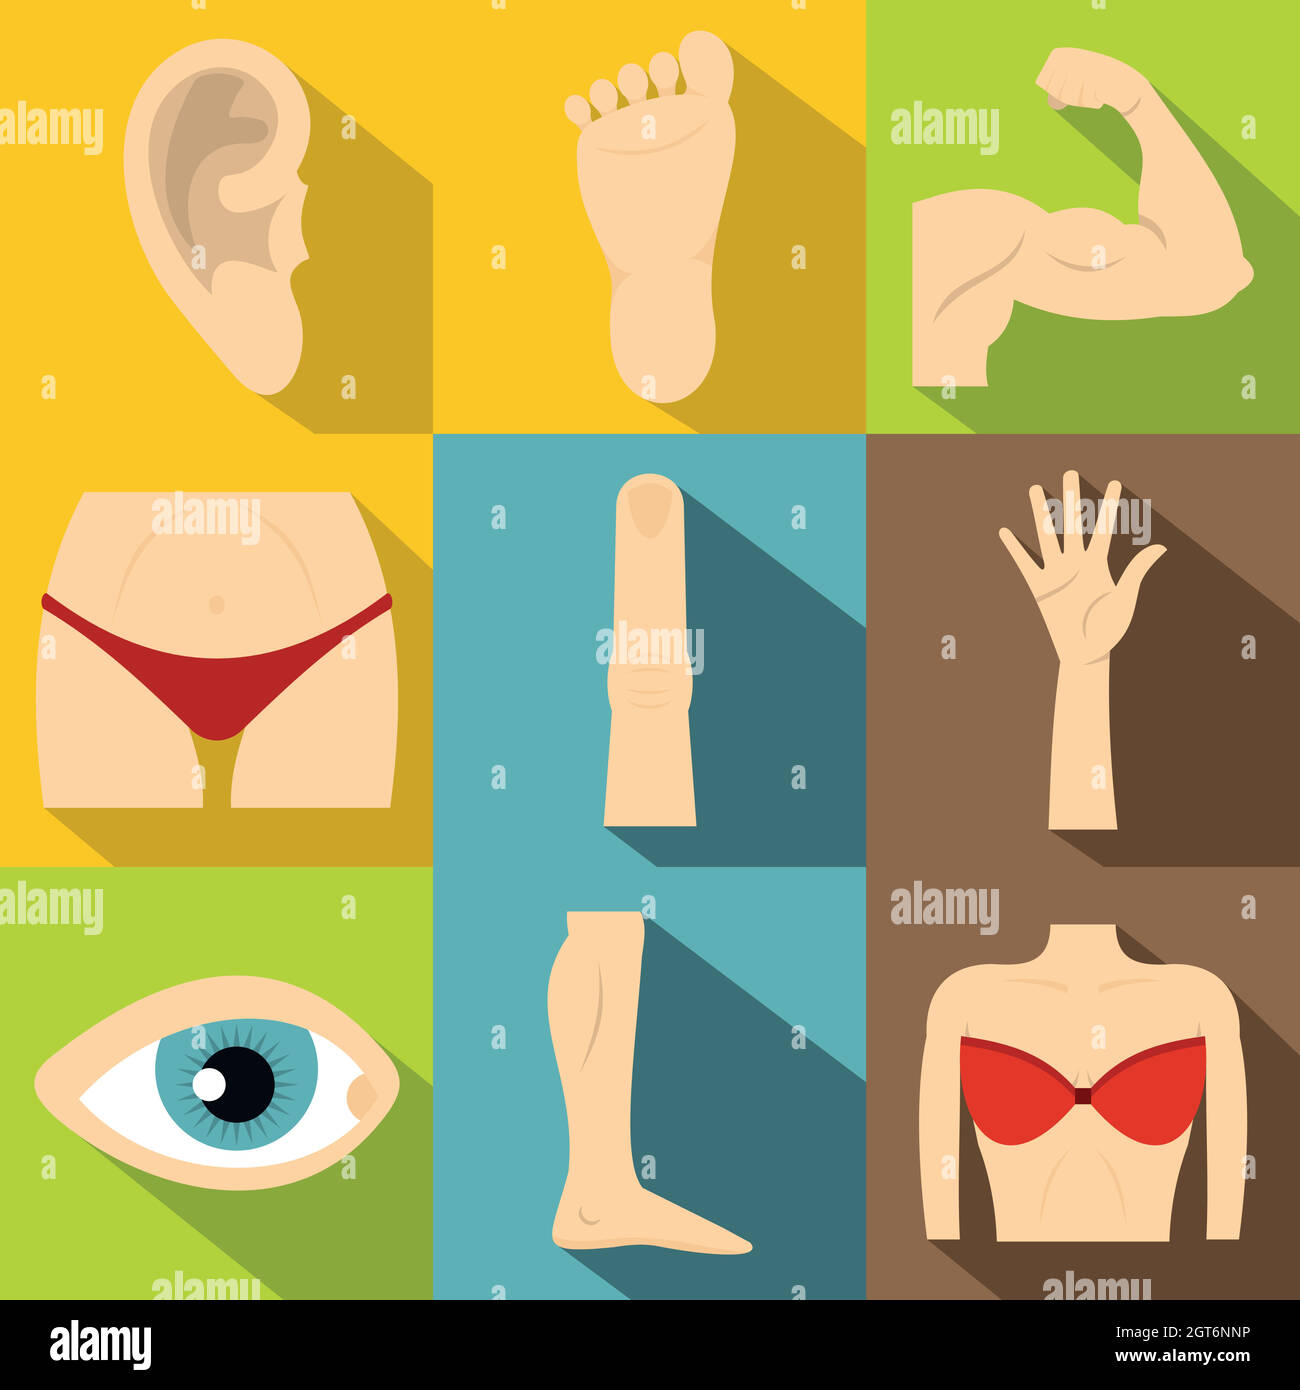 Body parts icons set, flat style Stock Vector